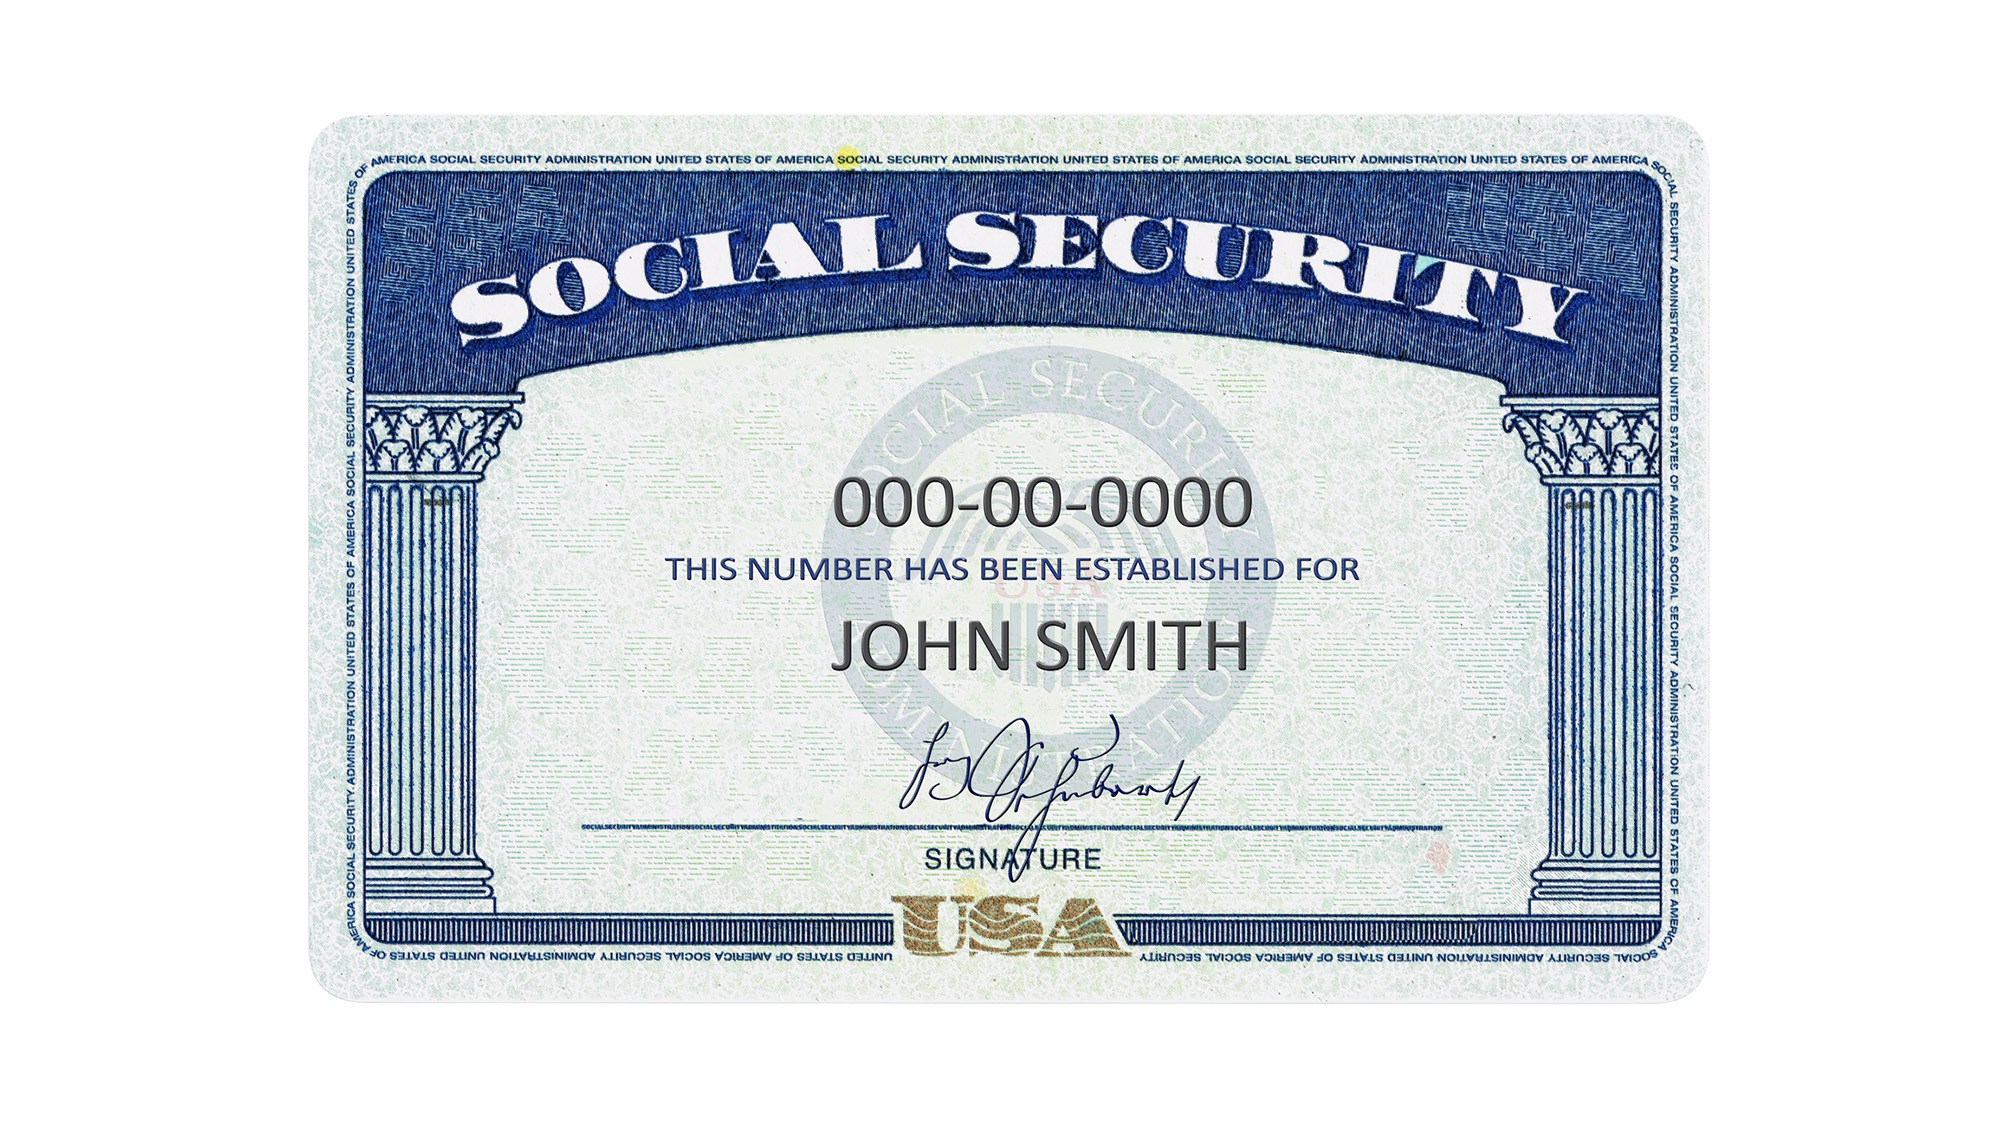 How Can I Get Social Security Card - How To Get Social Security Card ...